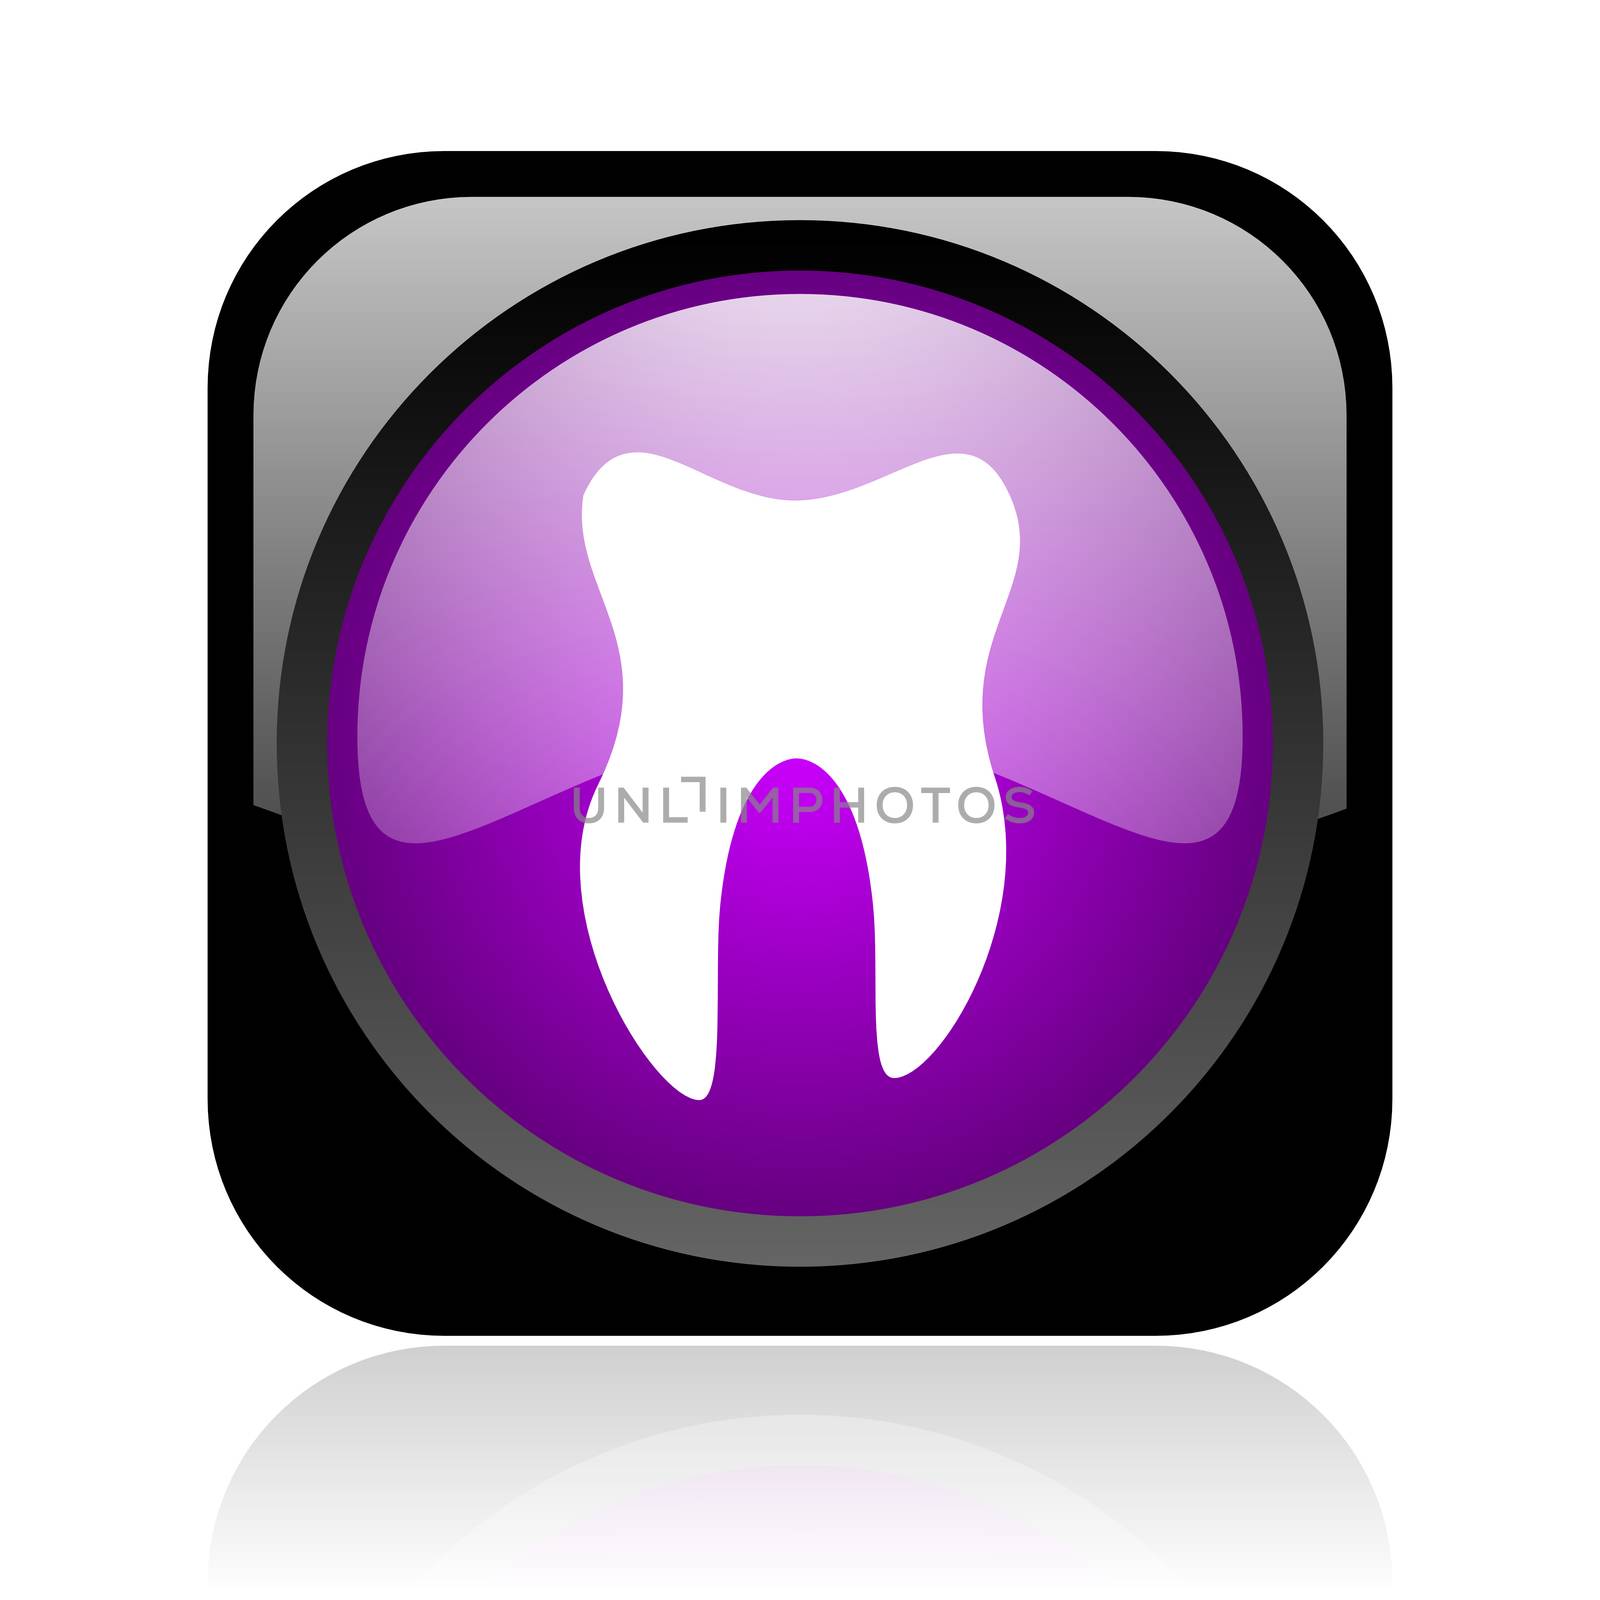 tooth black and violet square web glossy icon